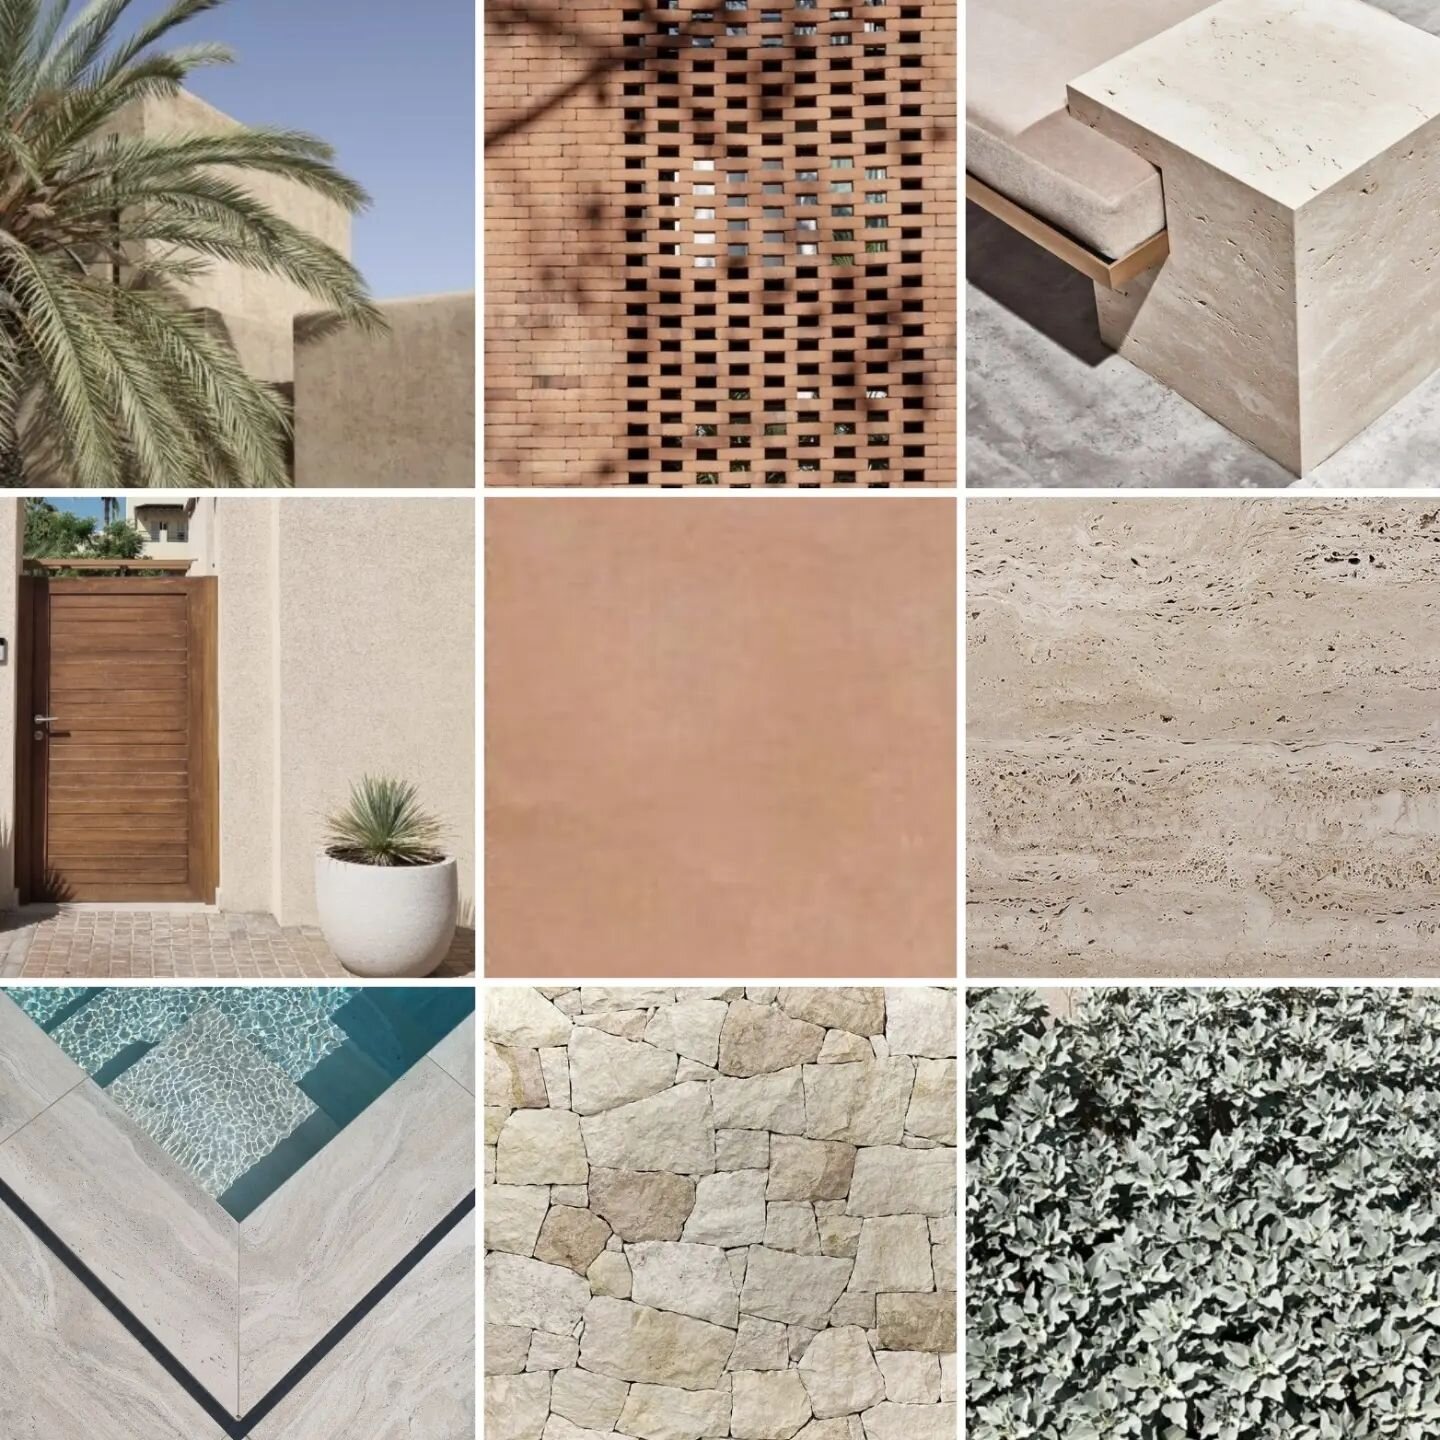 MOOD BOARD // 
Mood boards serve as visual narratives, weaving together colors, textures, and concepts to articulate a shared vision. They ignite creativity, align ideas, and provide a tangible foundation for cohesive design, fostering a unified aest